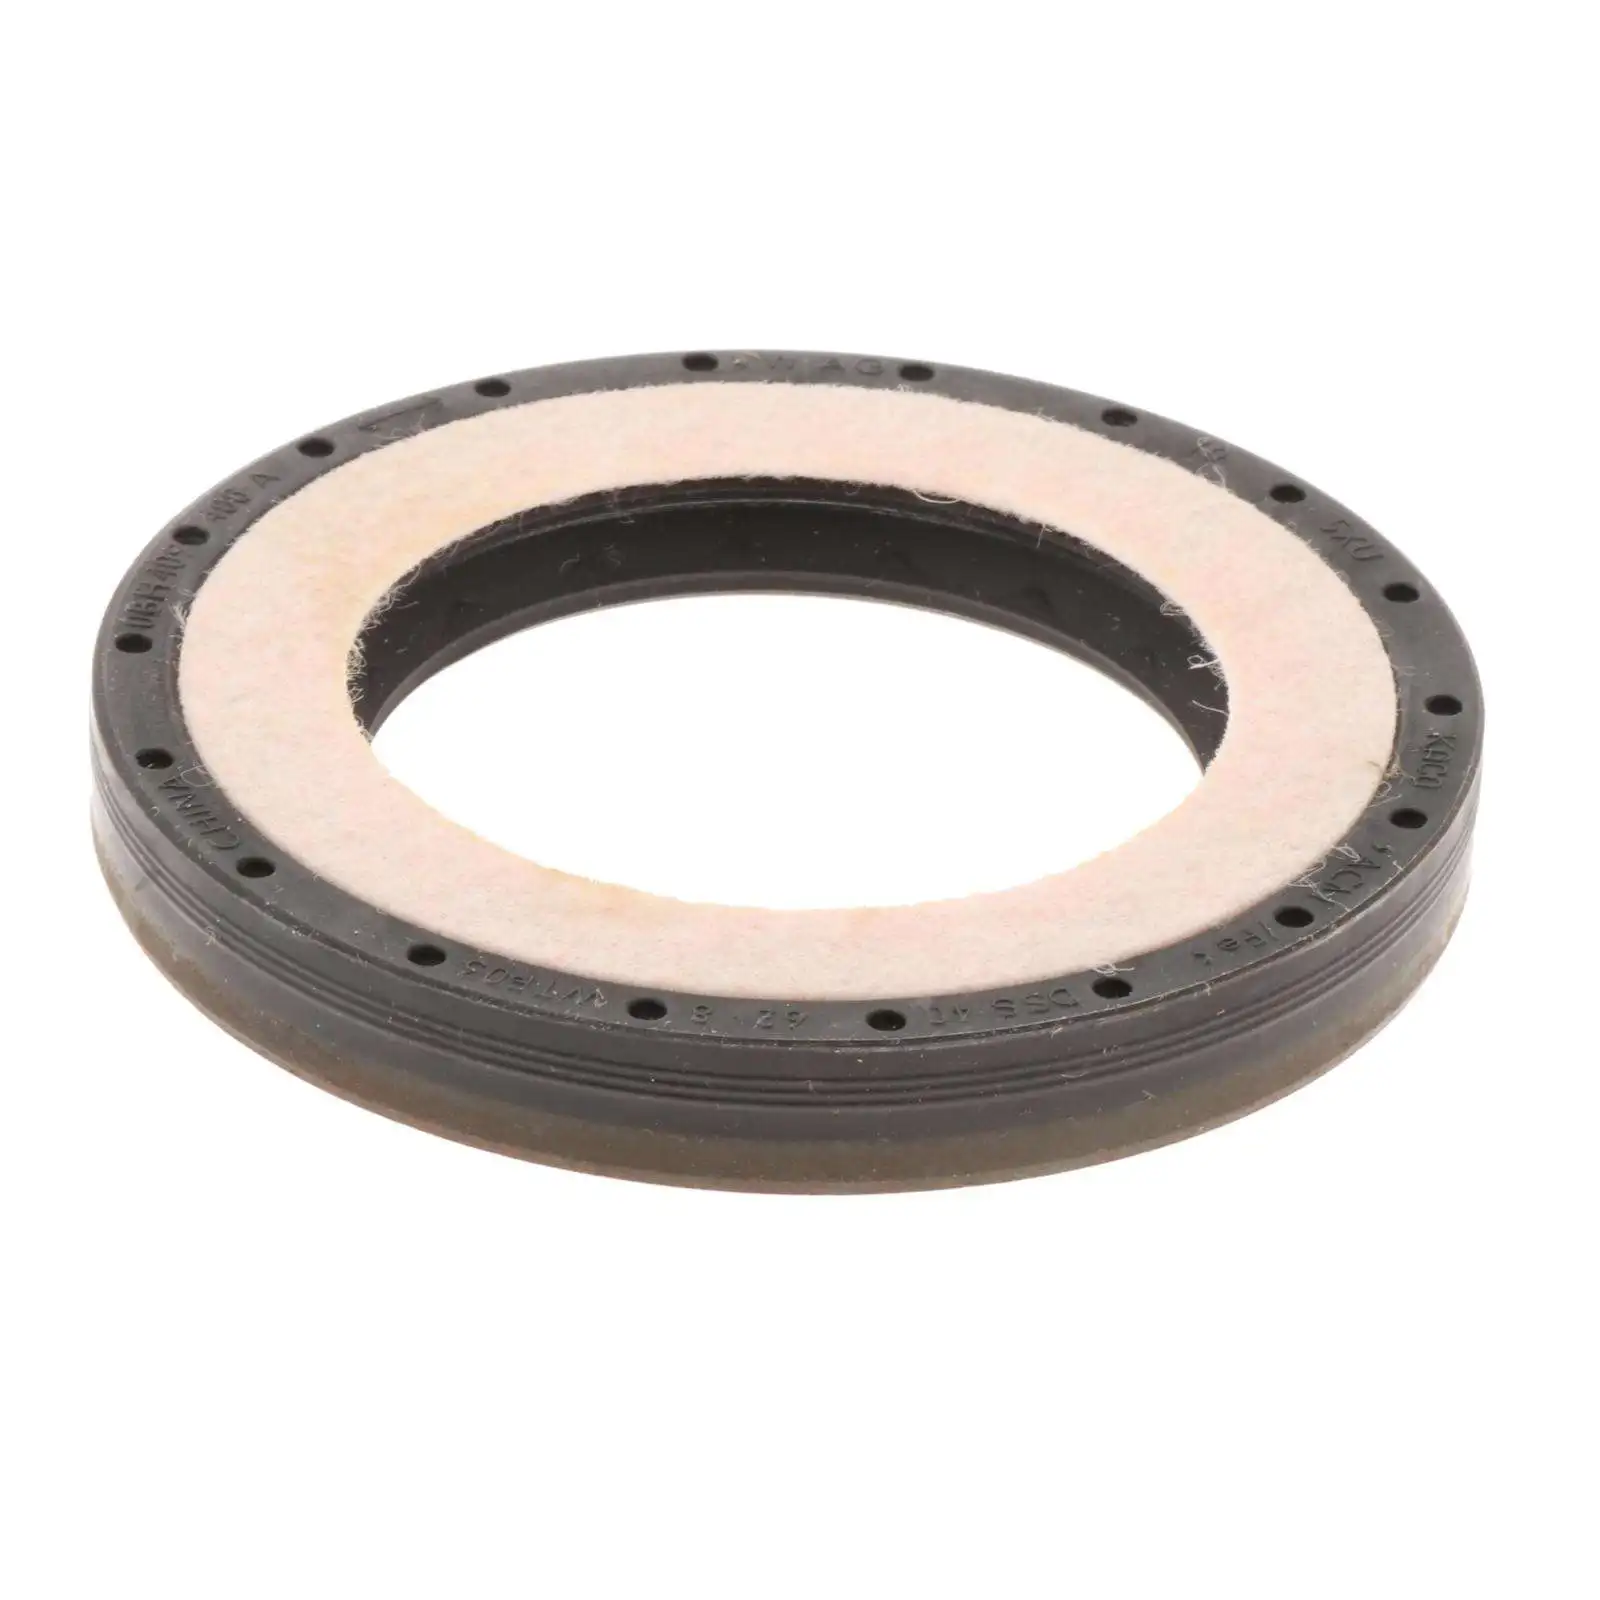 Automatic Transmission Half Shaft Oil Seal for Lingdu Transmission Drivetrain Replacement Accessories for Audi A3 Golf 7